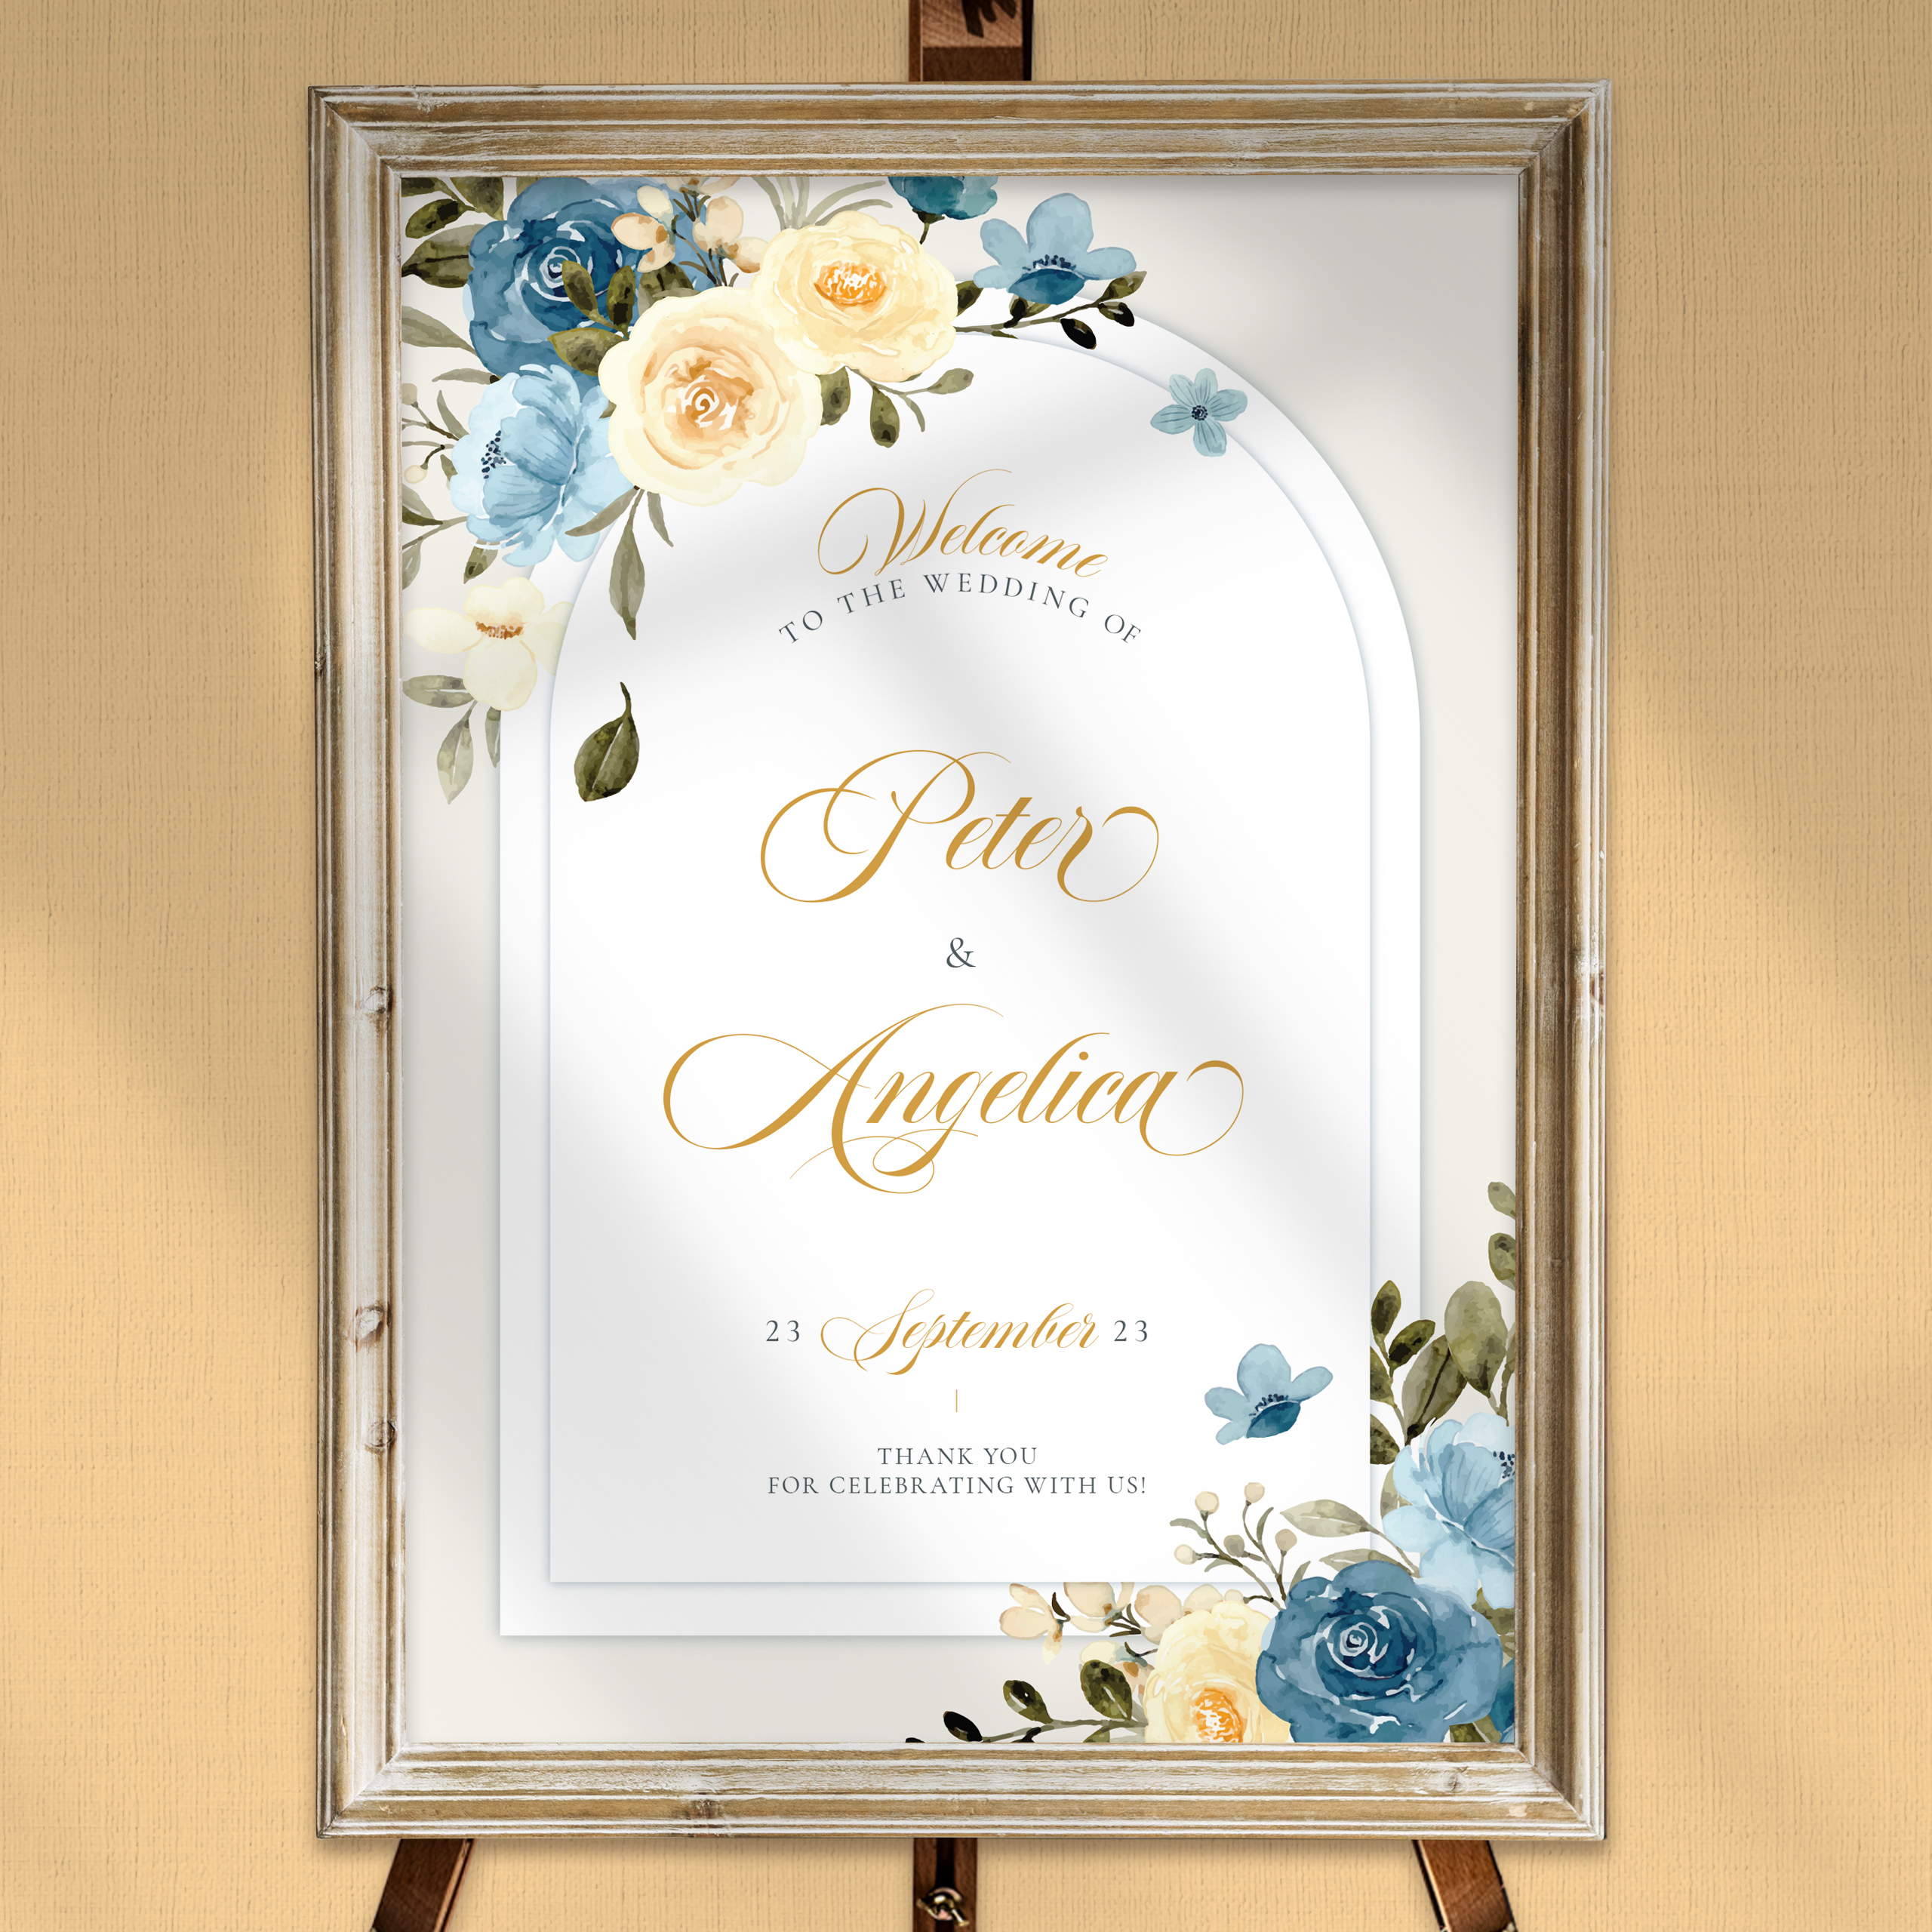 NEW!!! BLUE & CREAM FLORAL WEDDING WELCOME BOARD